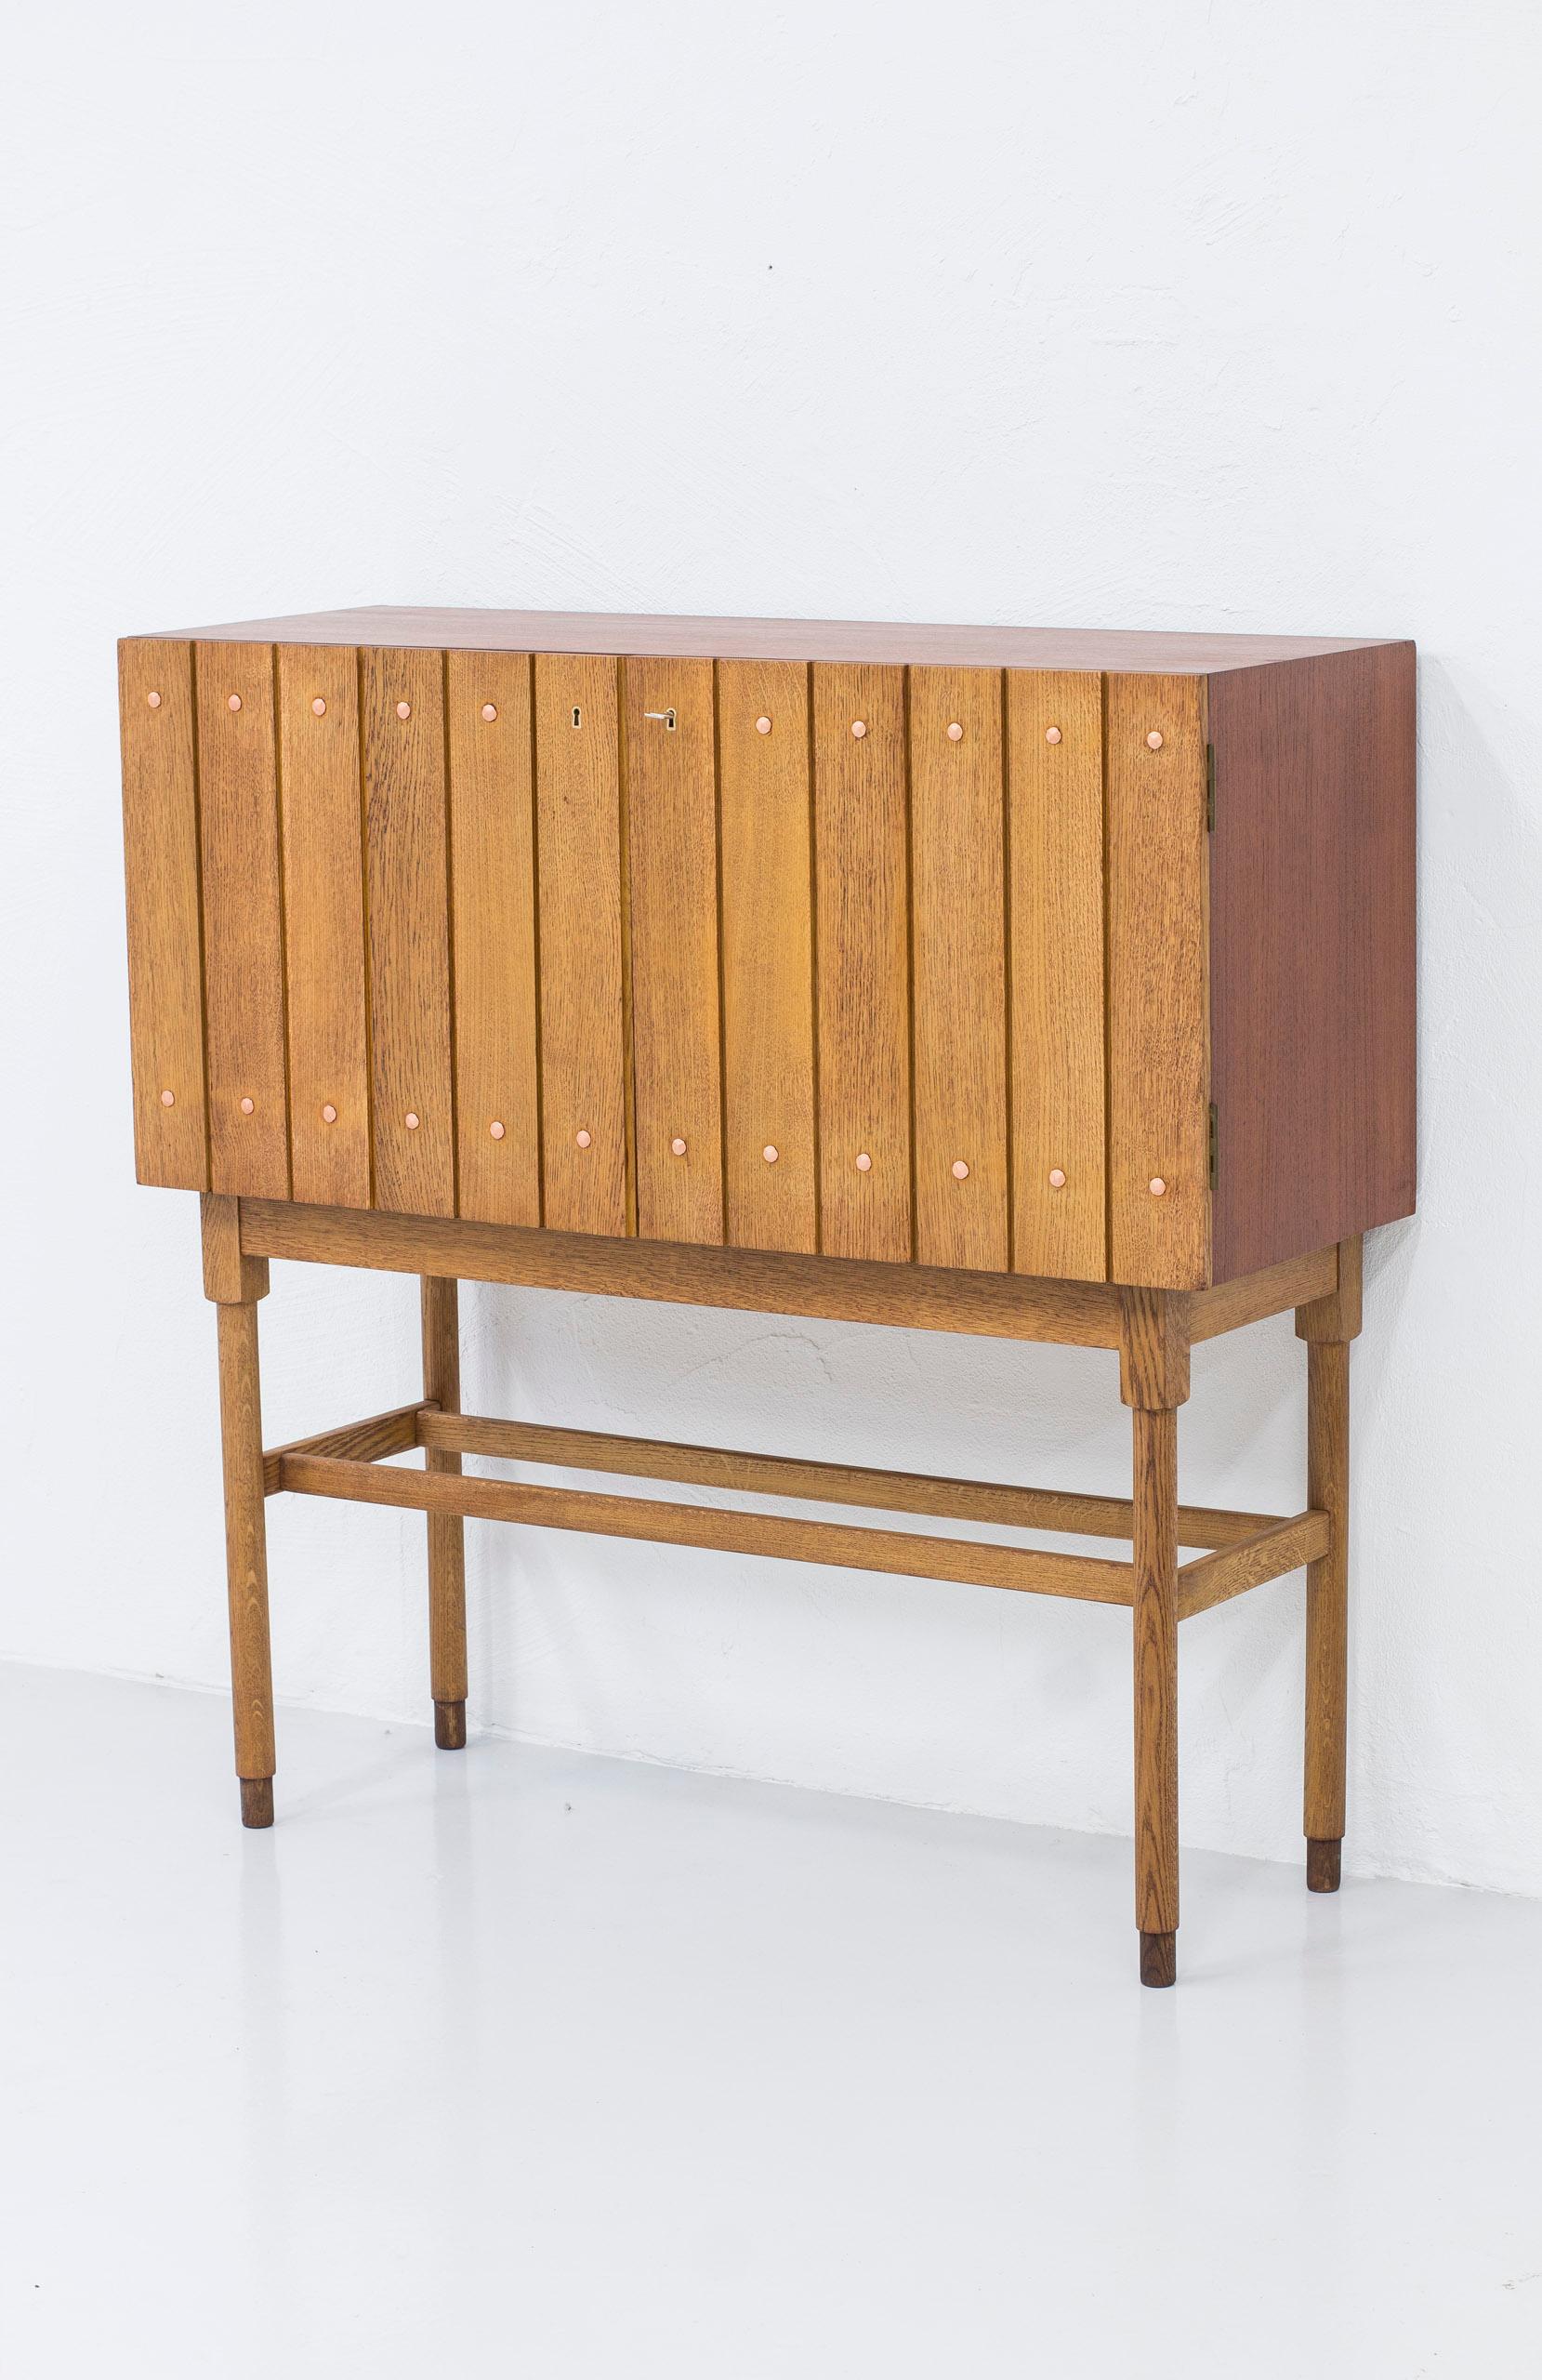 Bar cabinet designed by Bjørn Engø. Produced in Norway by Gustav Bahus during the 1940-50s. Made from teak and doors of solid oak slats with copper nails. Base made from solid oak with contrasting oak feet. Inside of the cabinet in teak wood and